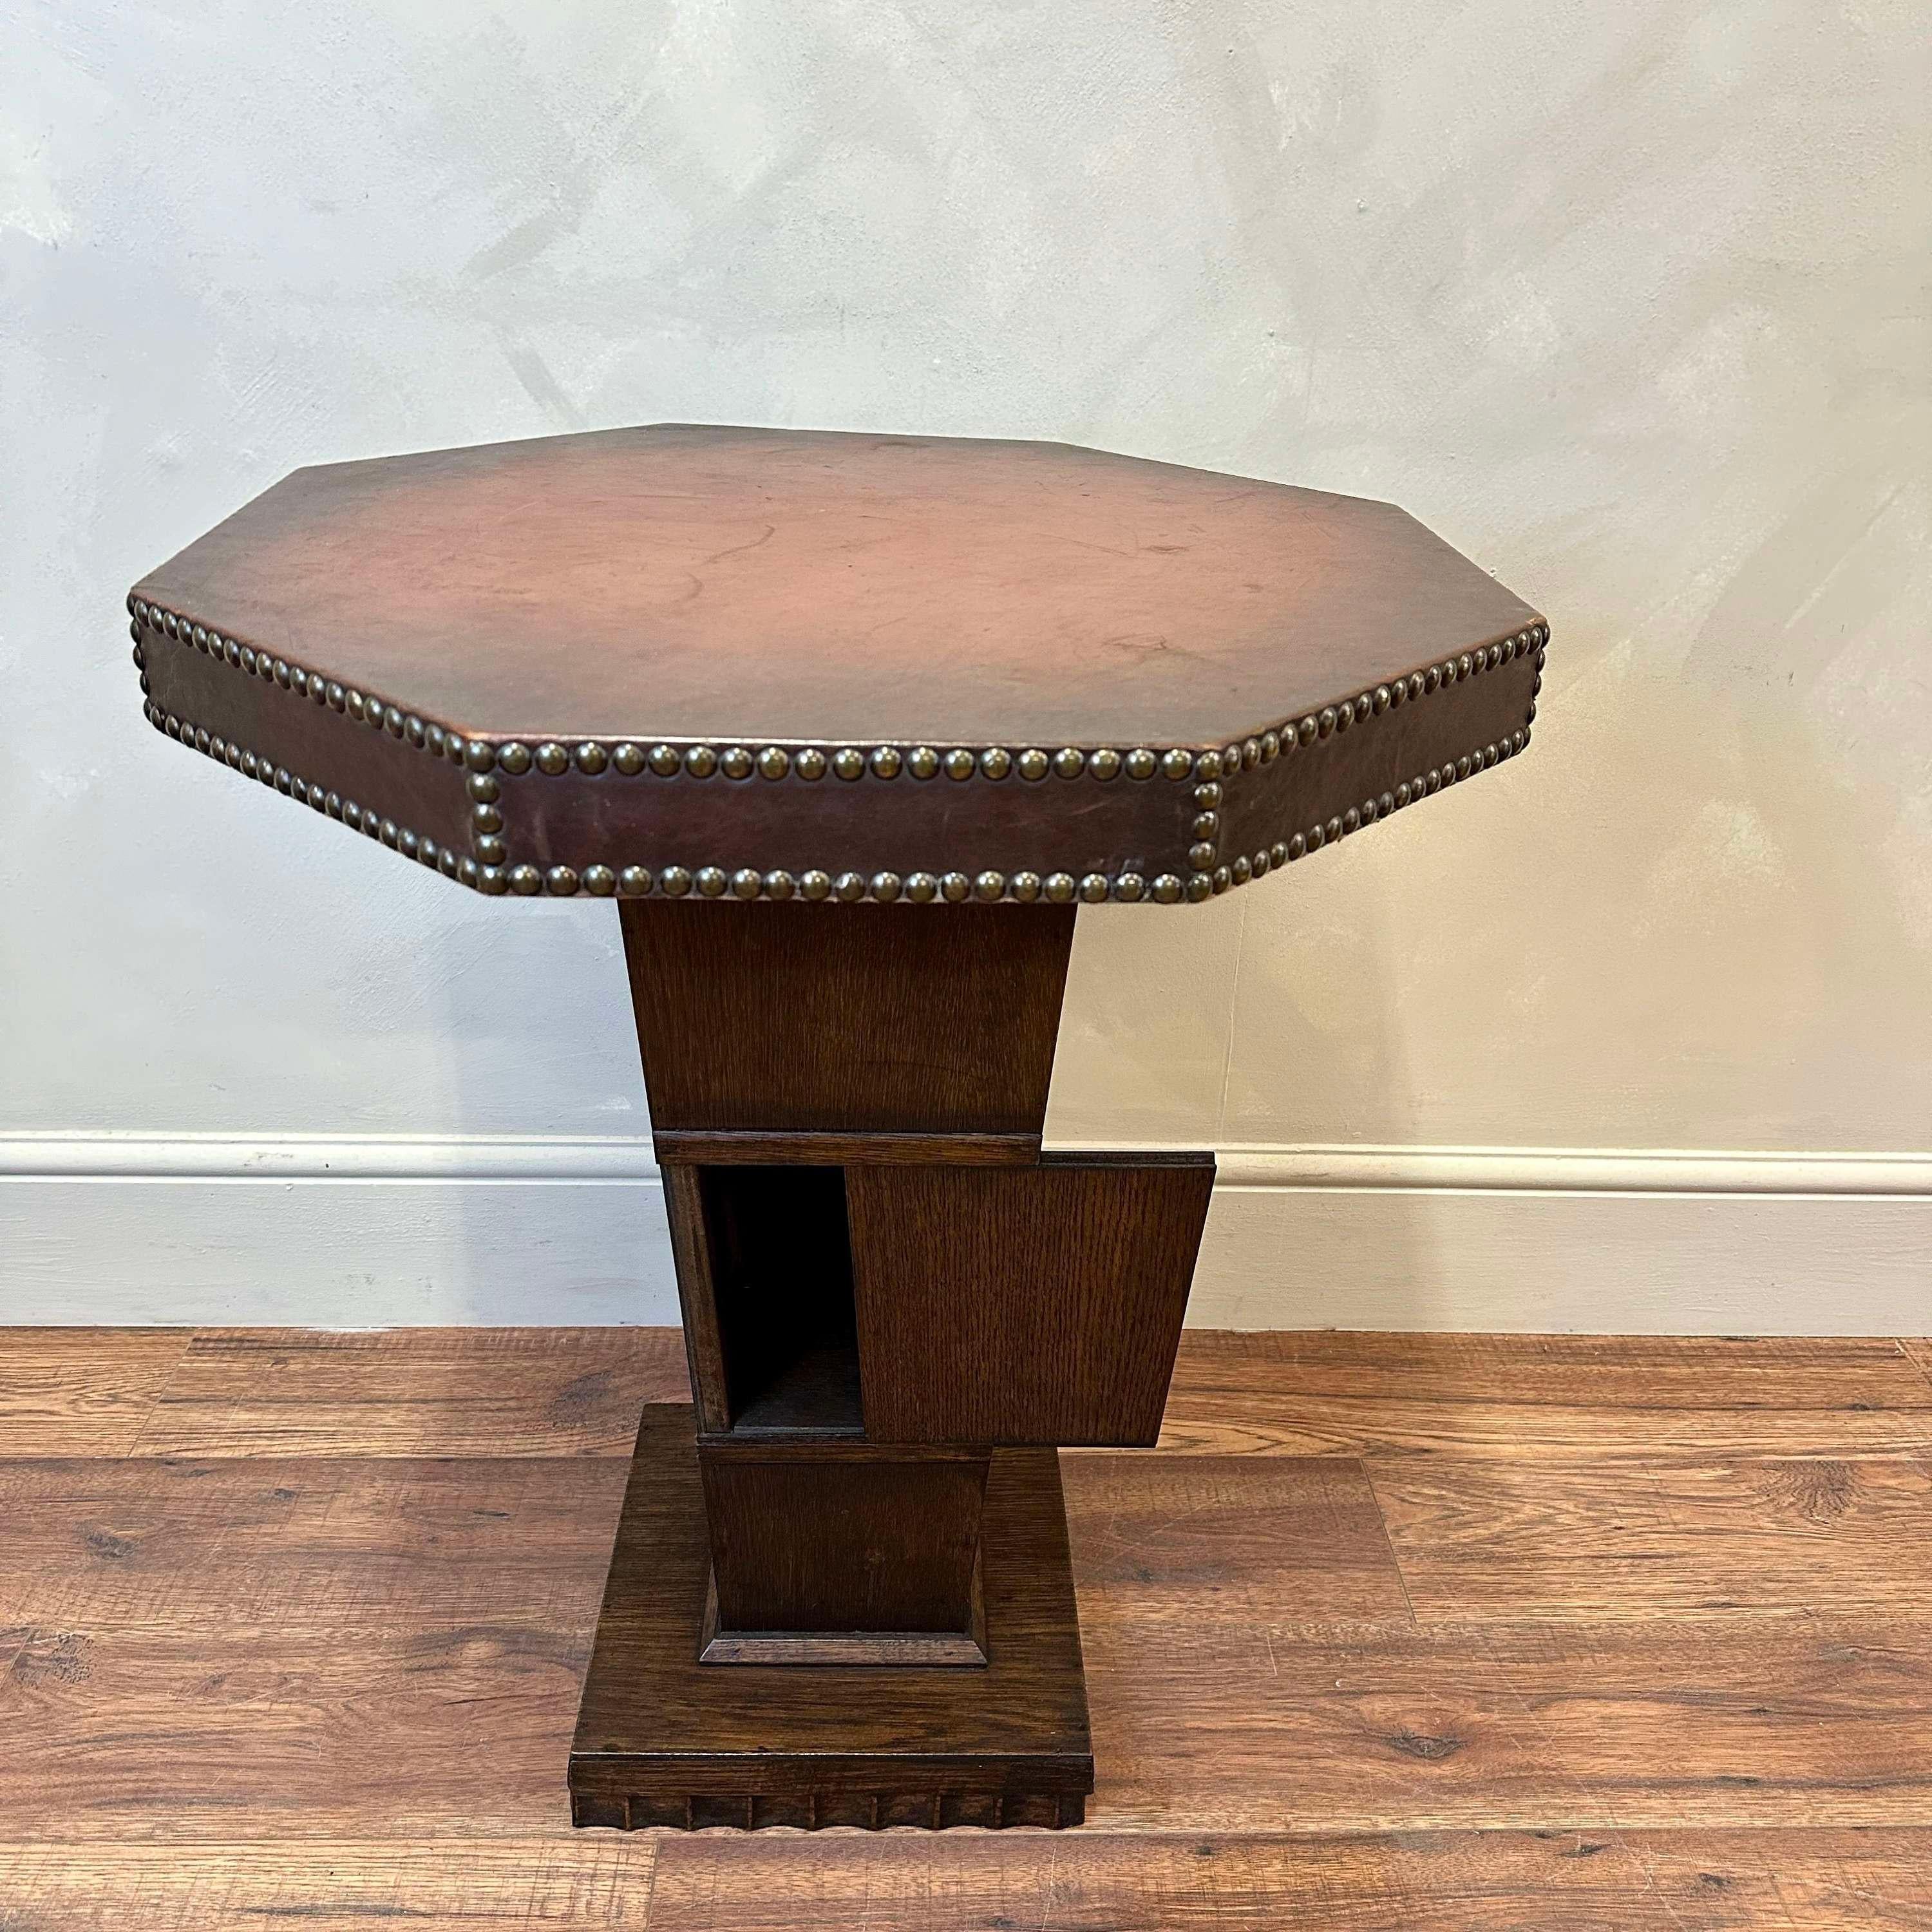 French, studded leather, octagonal top, occasional table. Red-brown colouration. 
Sitting on a single pedestal which unusually, conceals a cupboard.

France, circa 1950.

Height - 65 cm
Top diameter - 58 cm
Please message if any further info or